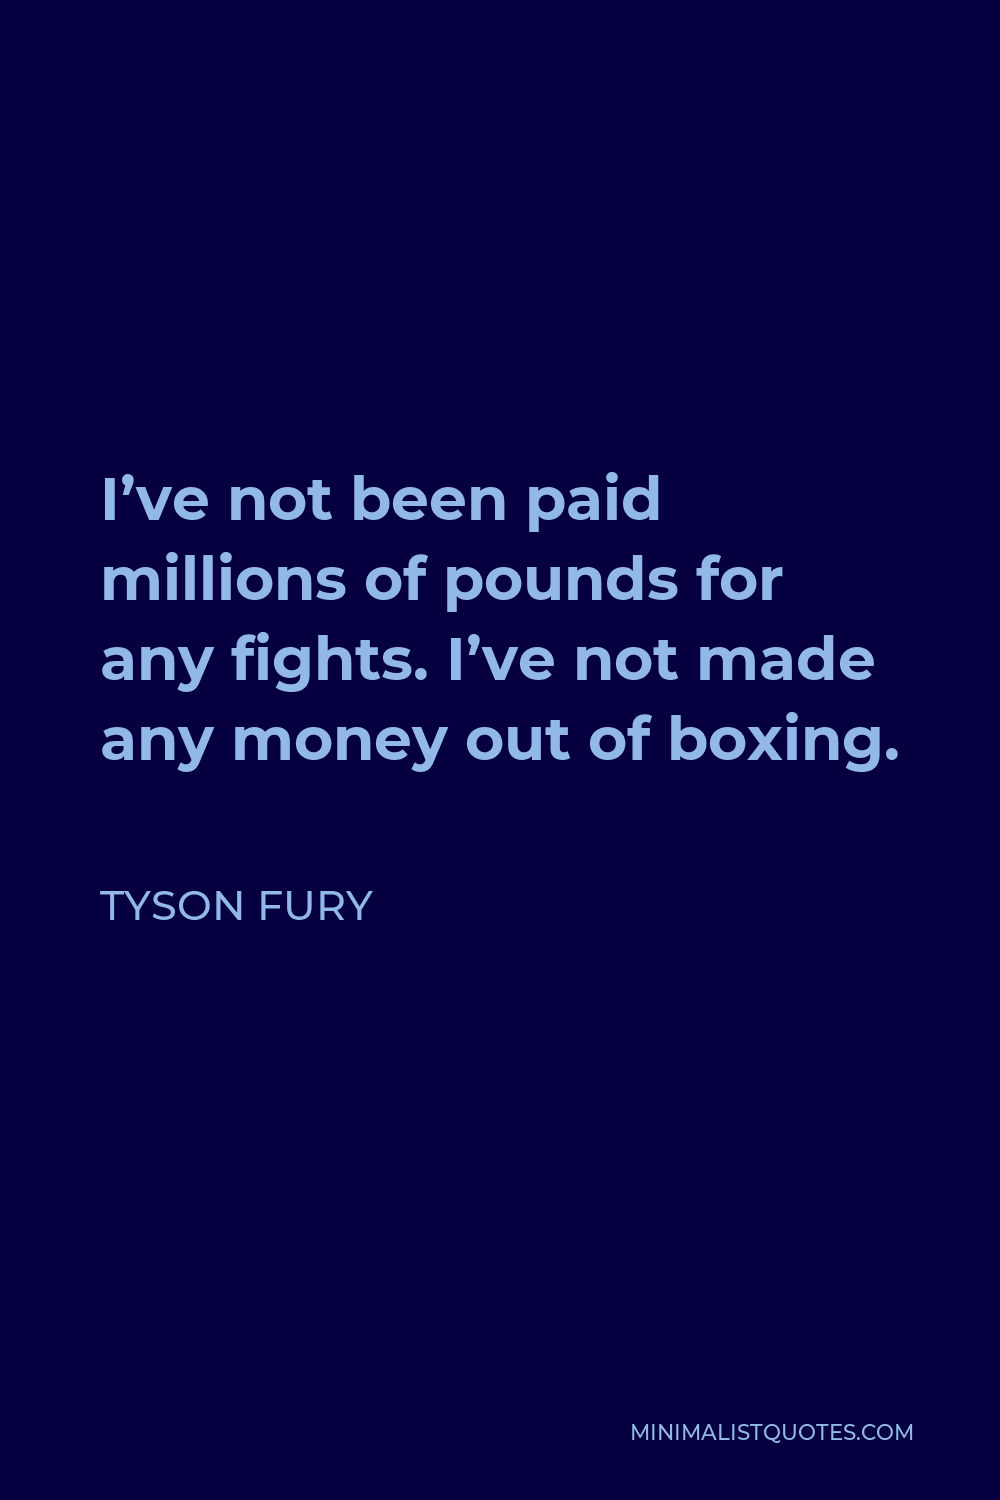 Tyson Fury Quote - I’ve not been paid millions of pounds for any fights. I’ve not made any money out of boxing.